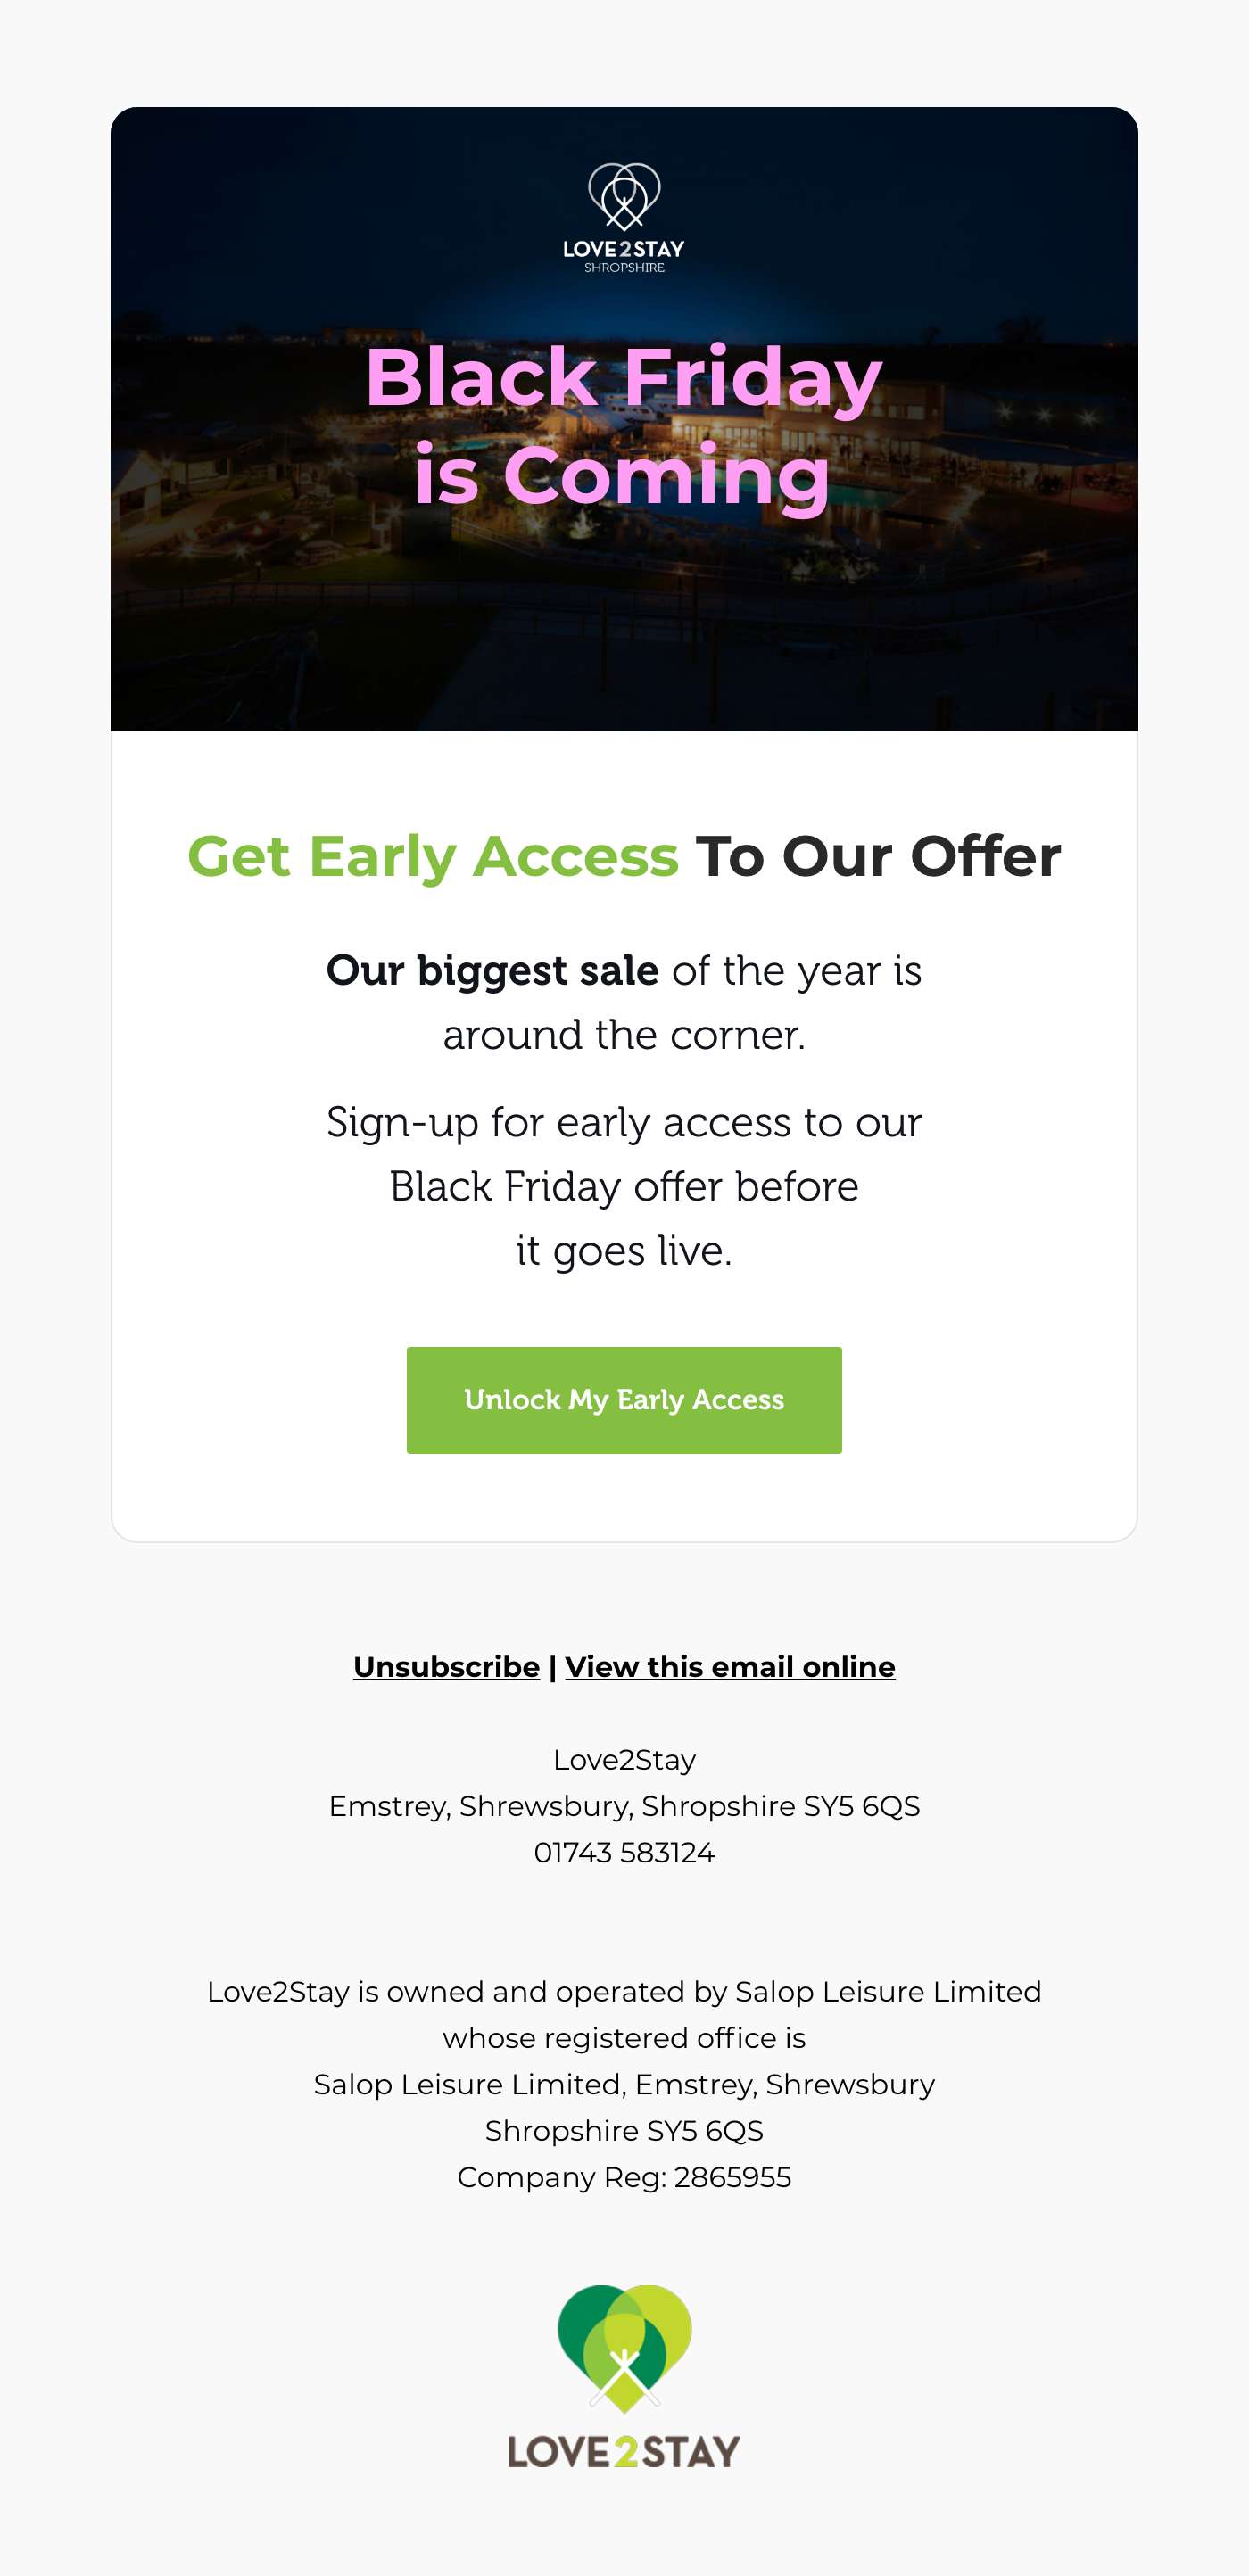 Get Early Access Email